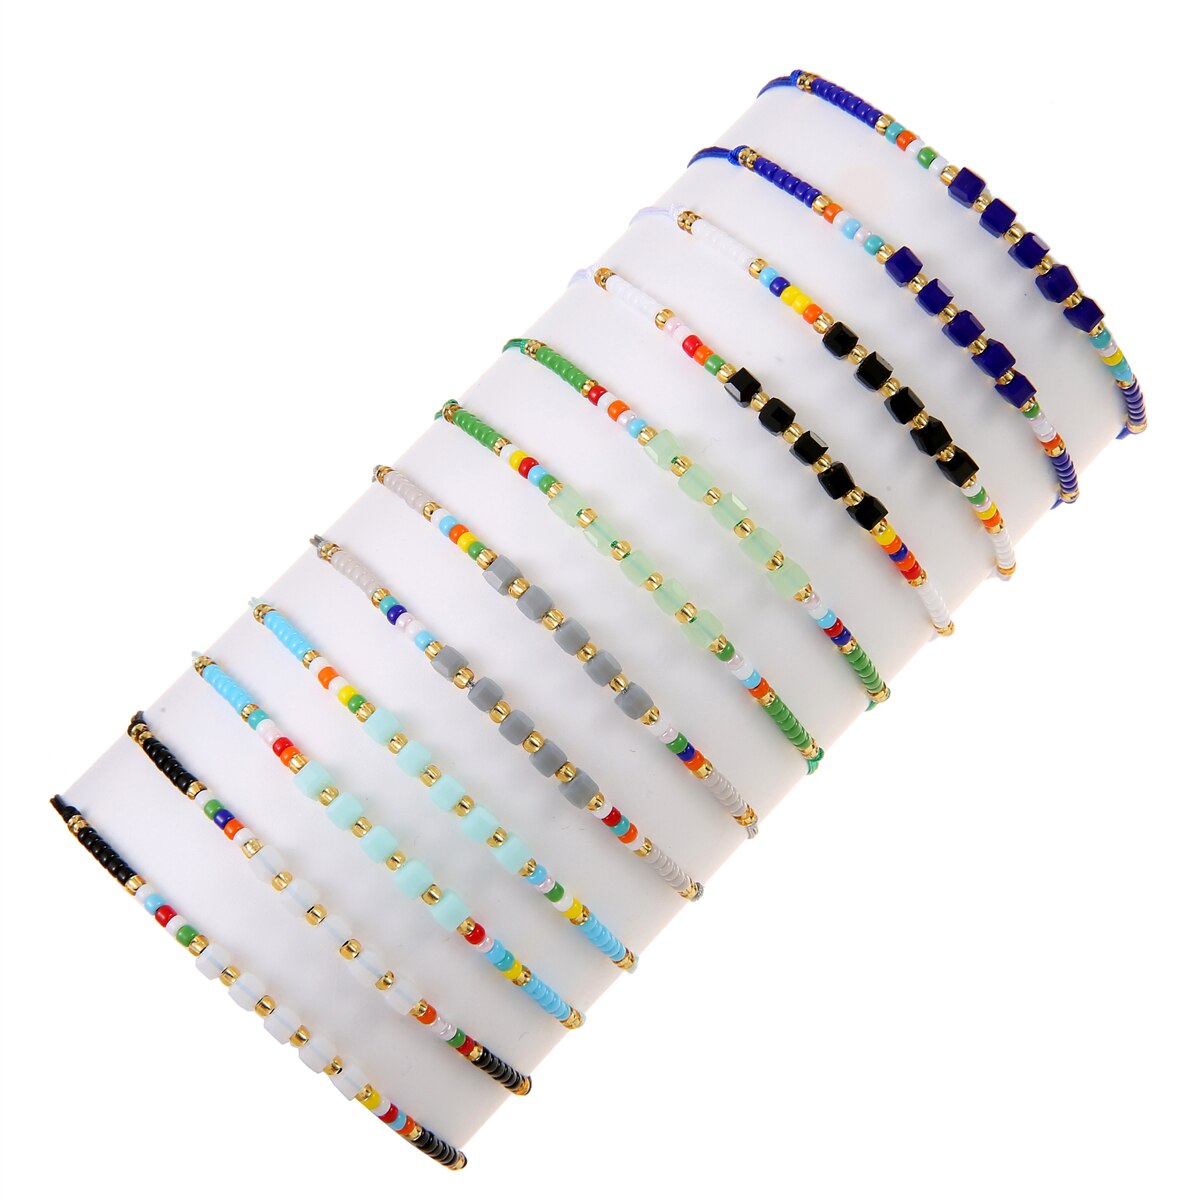 12pcs Colorful Japanese Rice Beads Square Crystal Braided Bracelet Set for Women Hand Braided Rope Chain Jewelry